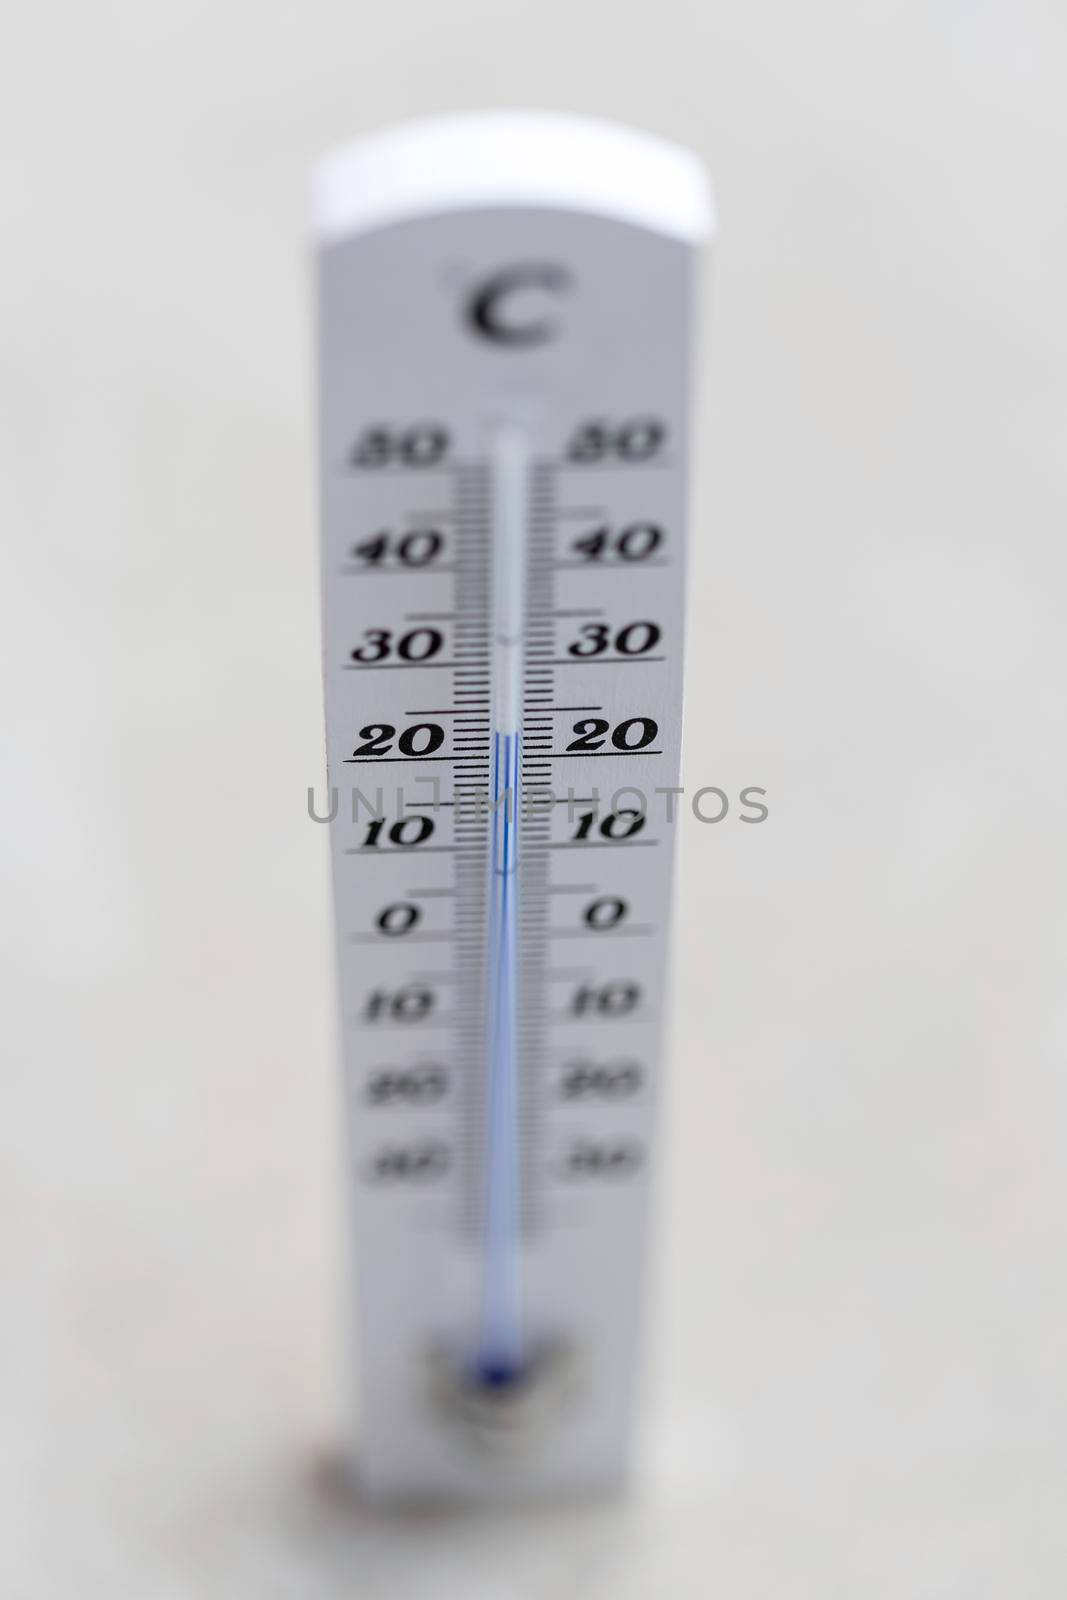 Thermometer close up picture in summer time, concrete floor